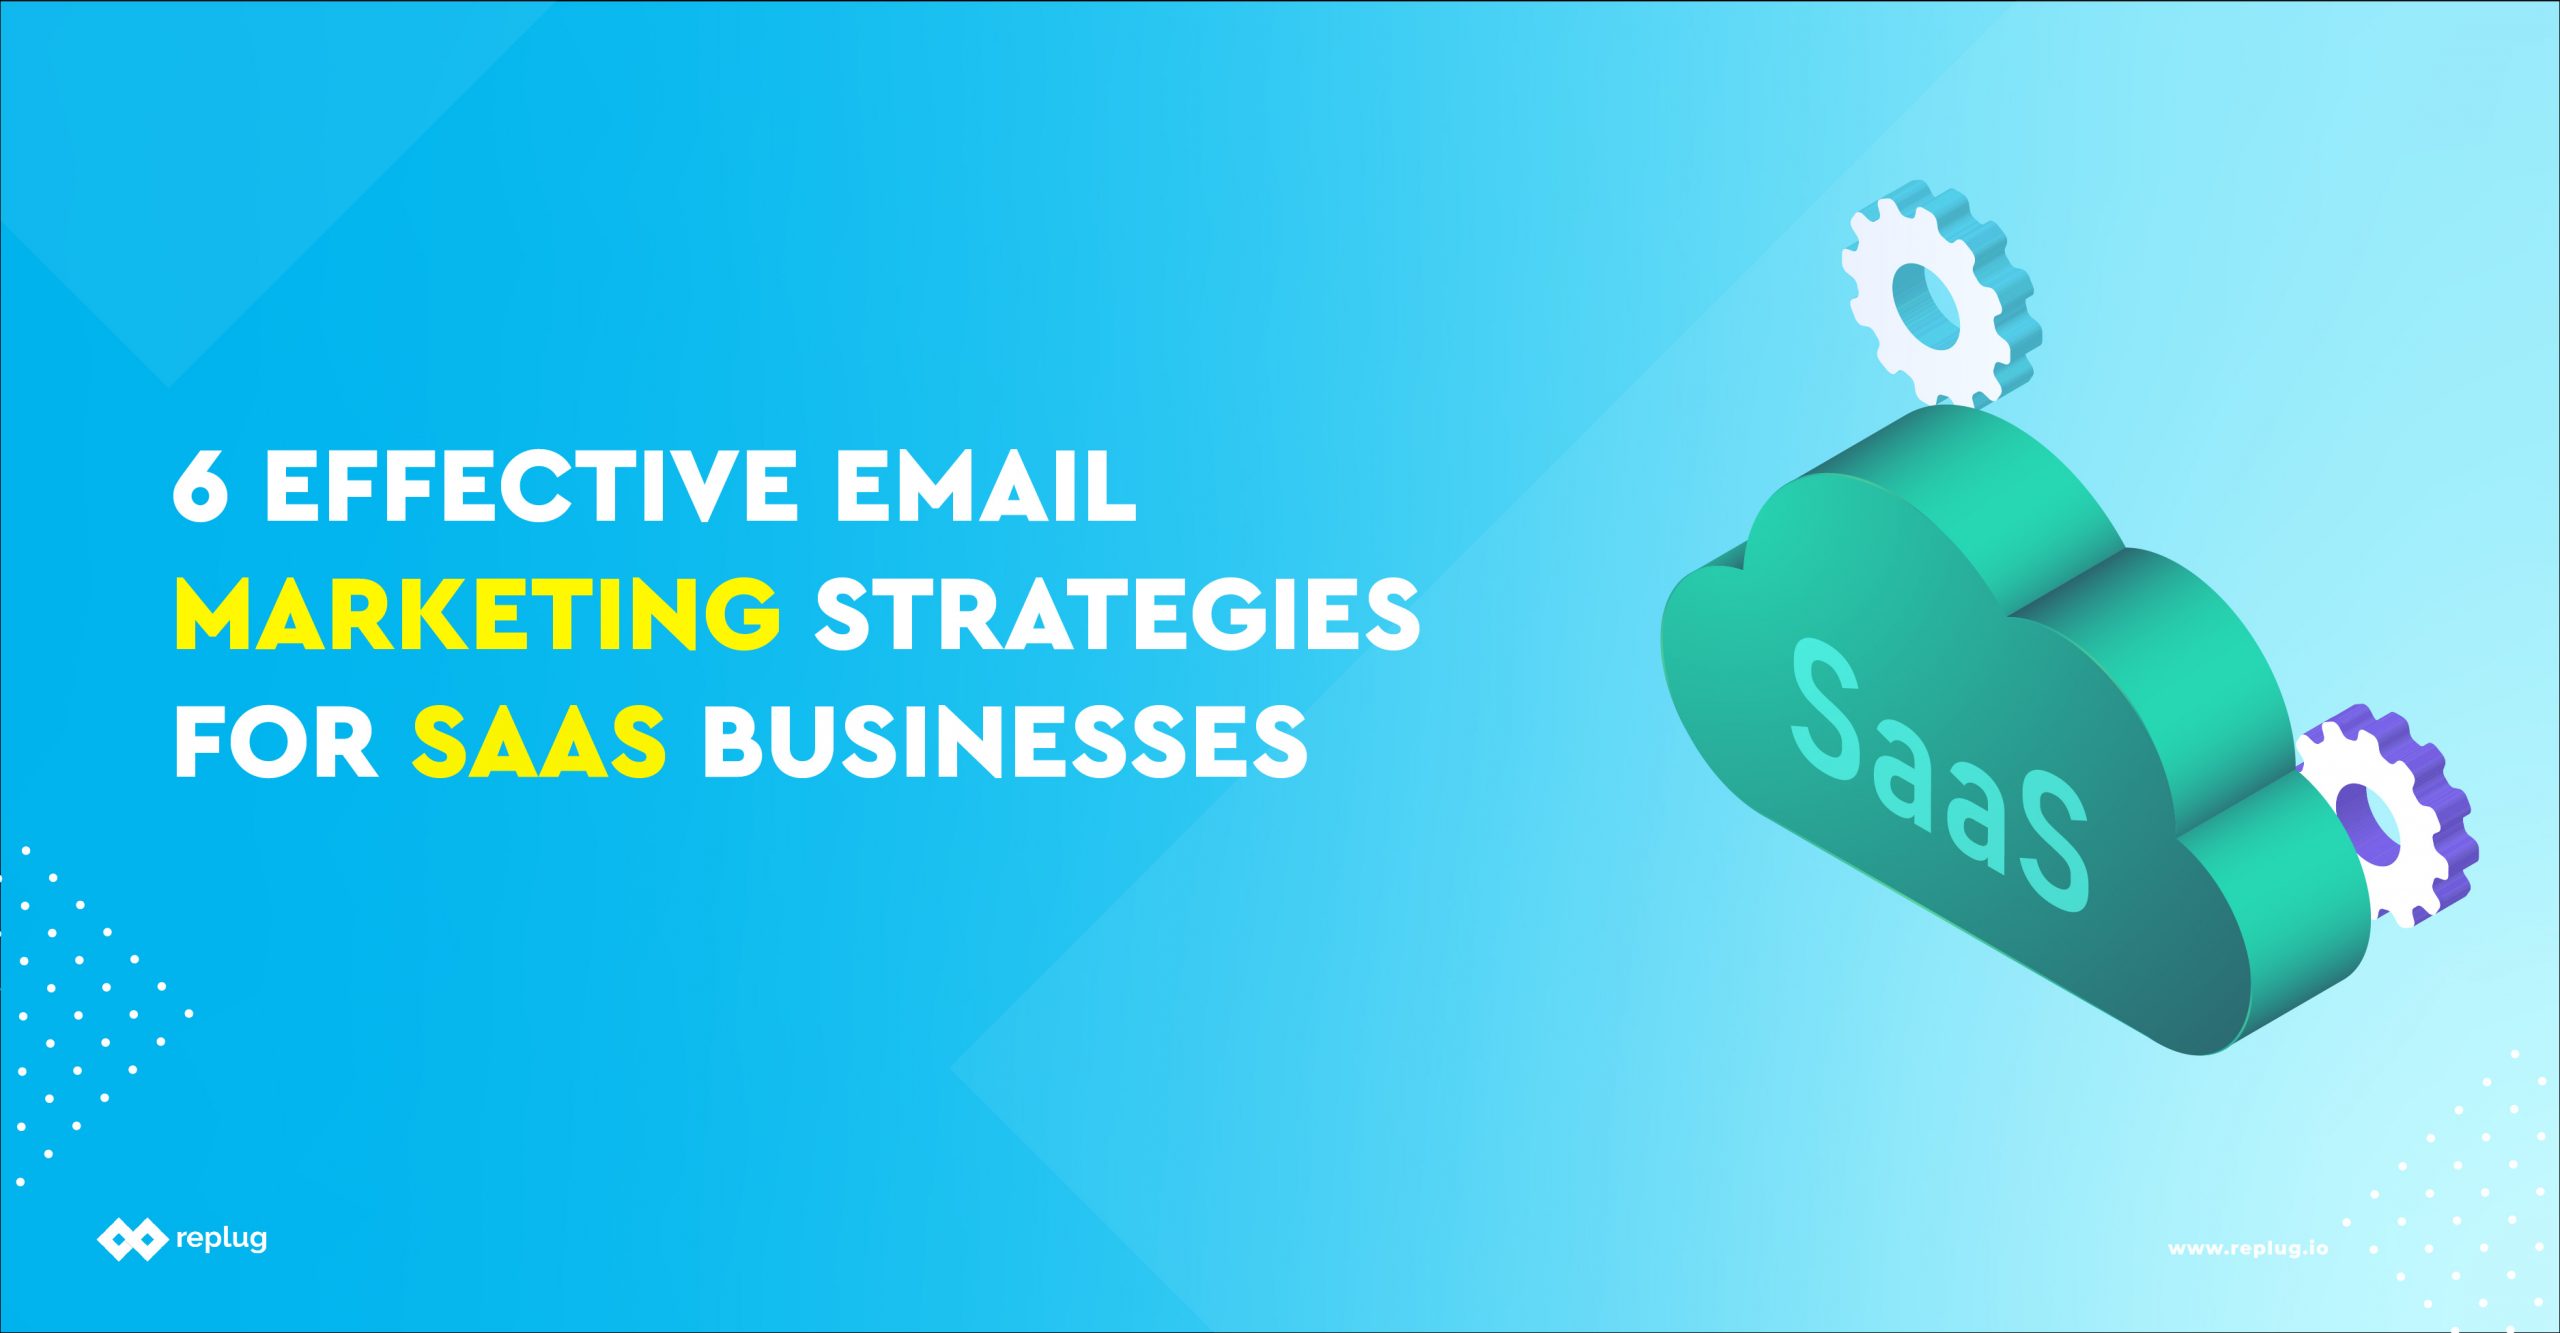 6 Effective Email Marketing Strategies for SAAS Businesses